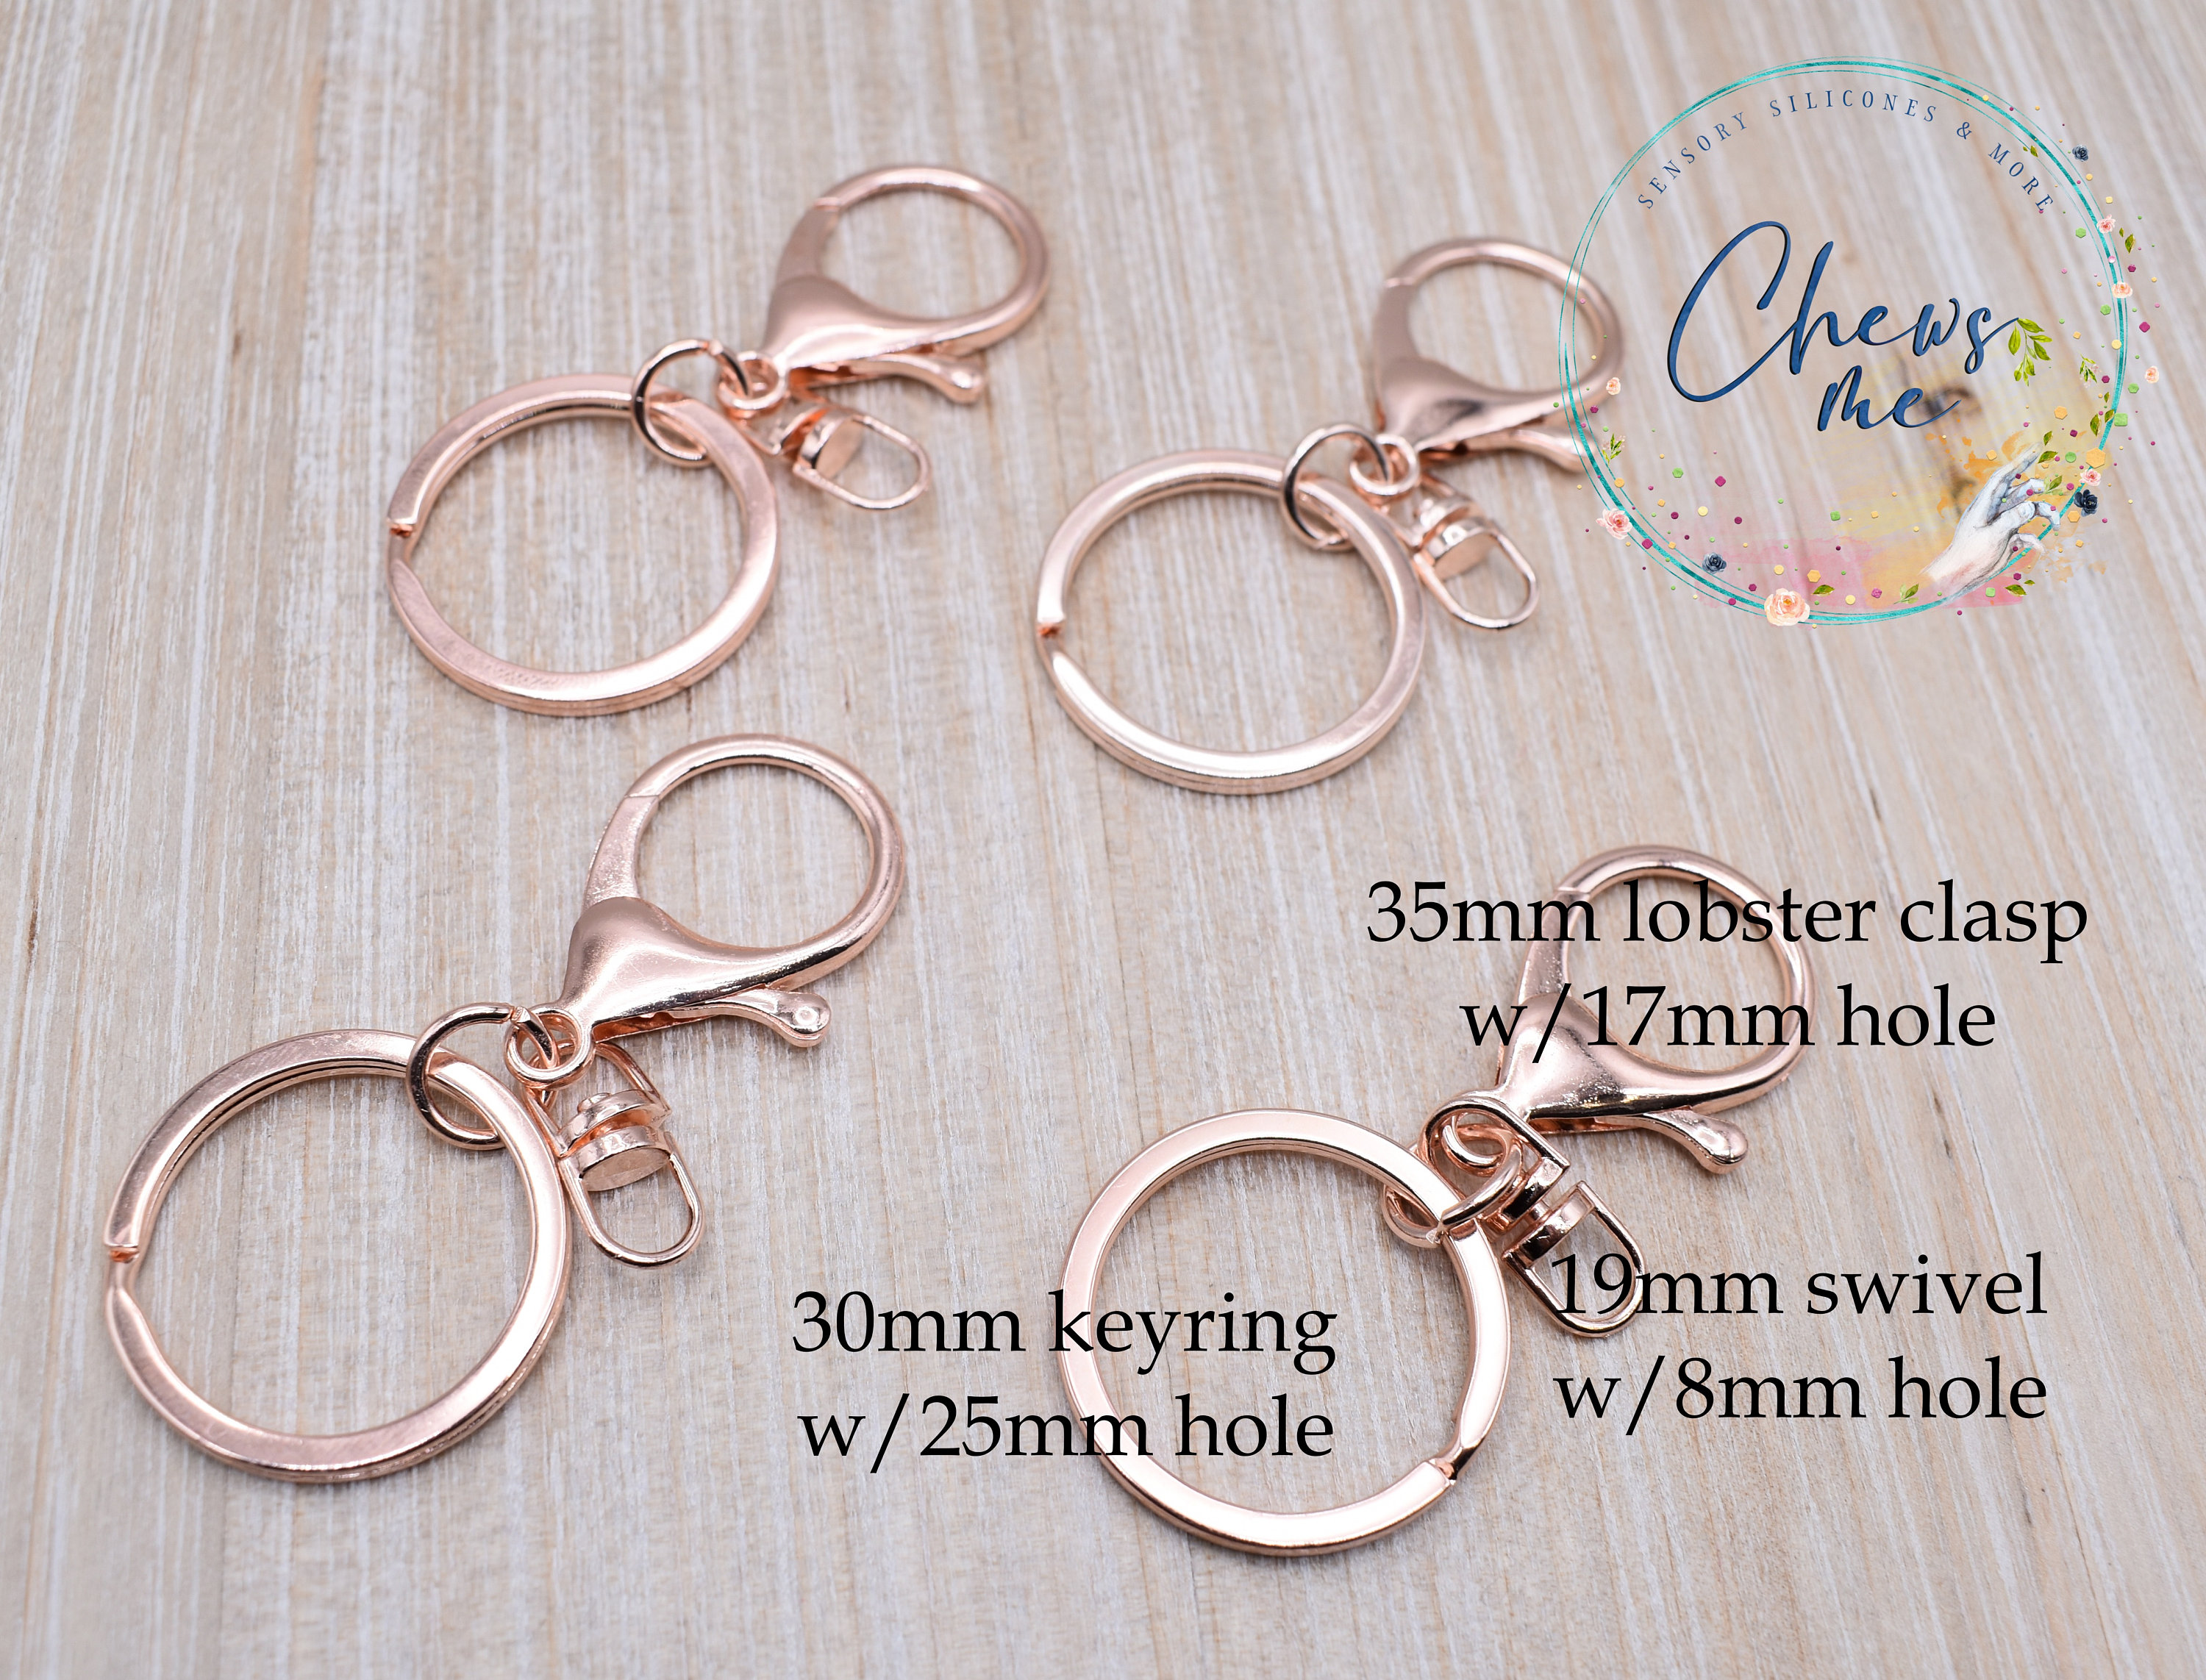 10pc Keychains With Clips, Bulk Key Rings With Clips, Key Ring